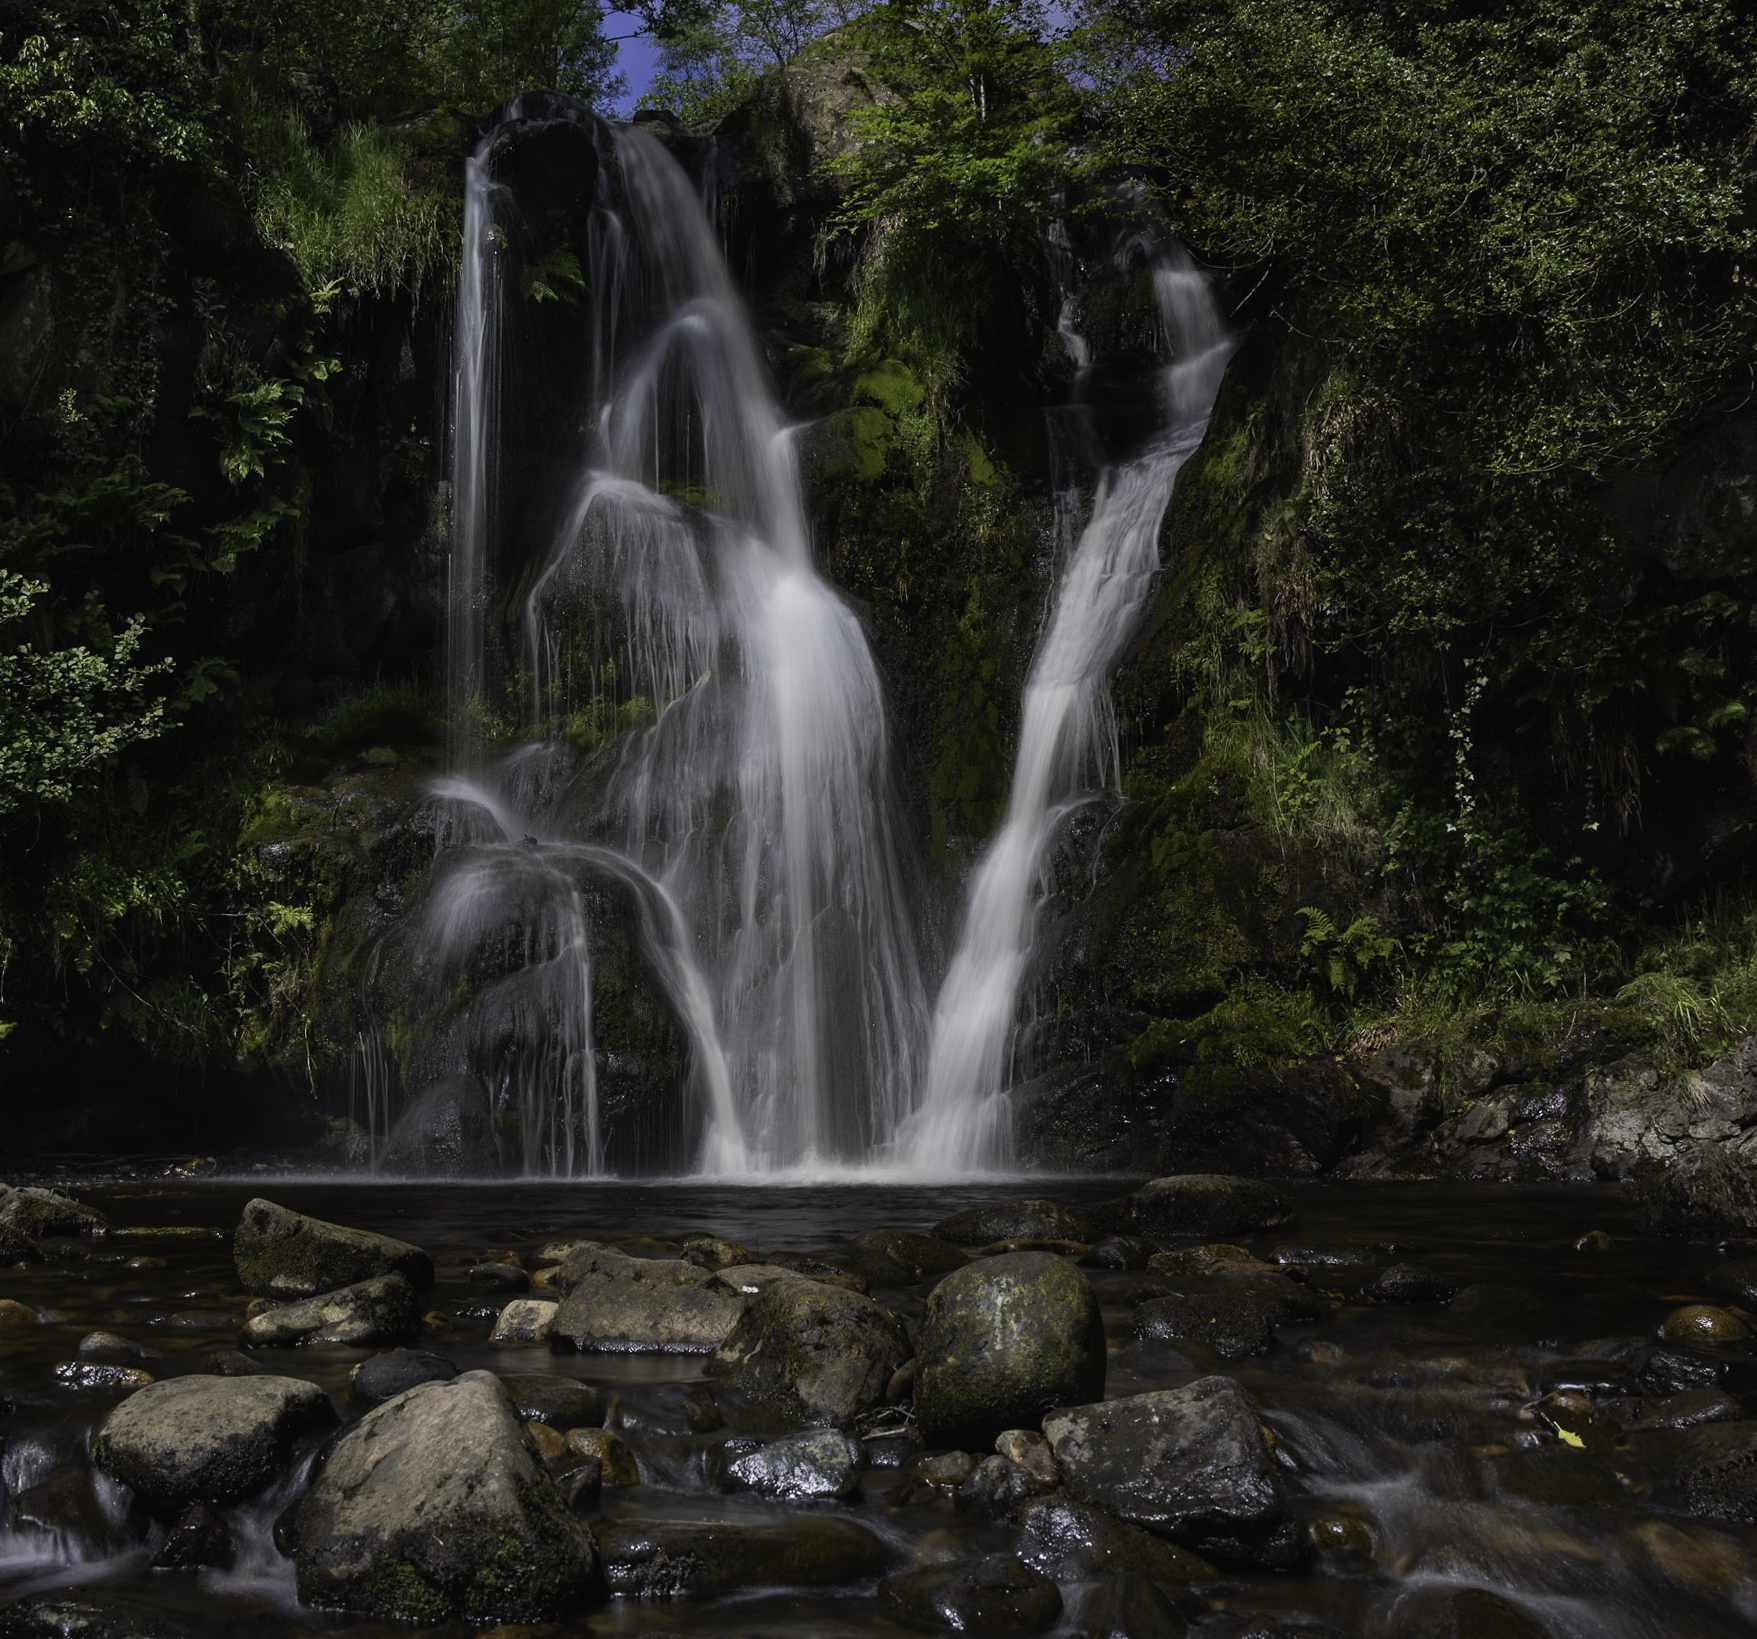 The beautiful waterfall of Posforth Gill in the Valley of Desolation in the Yorkshire Dales